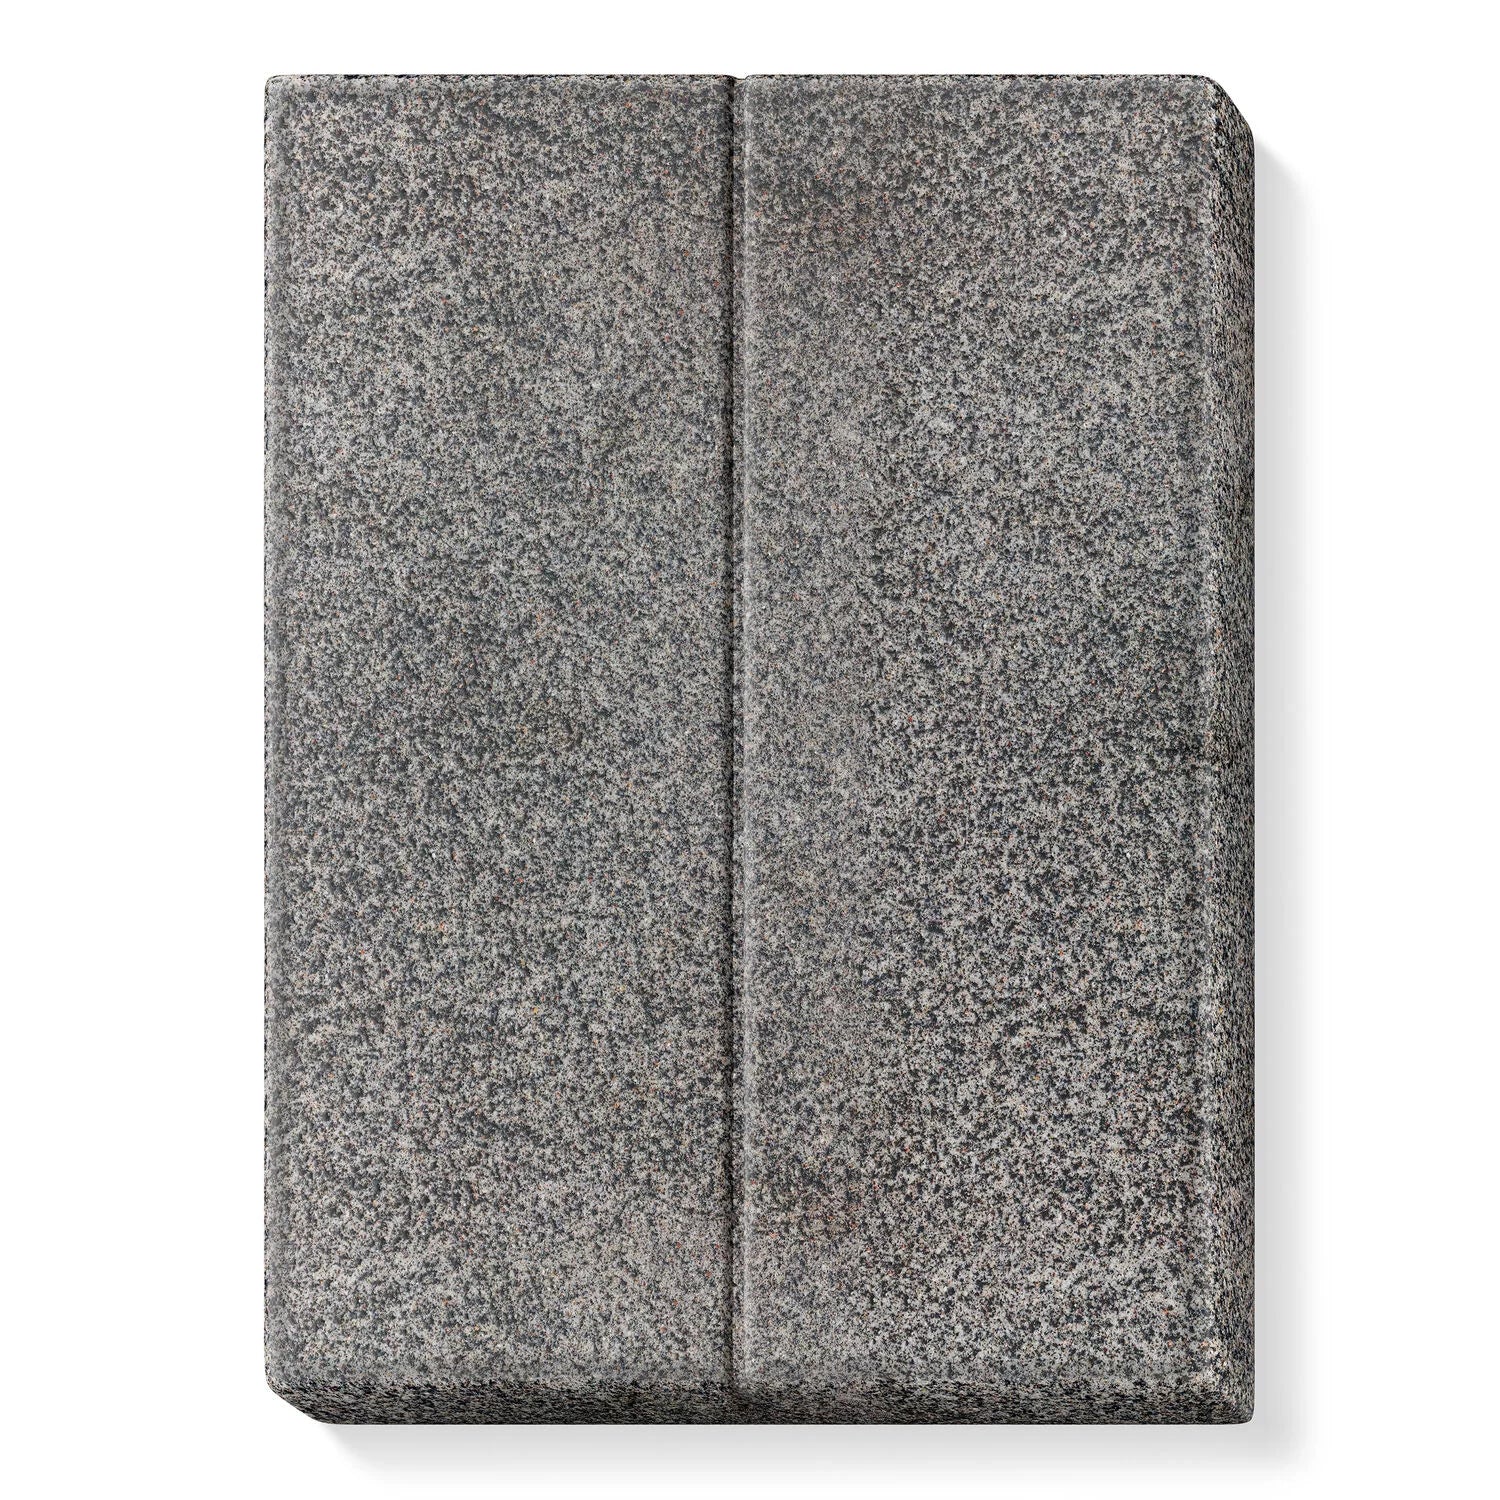 FIMO air 8150 350g Granite Effect Airdry Clay